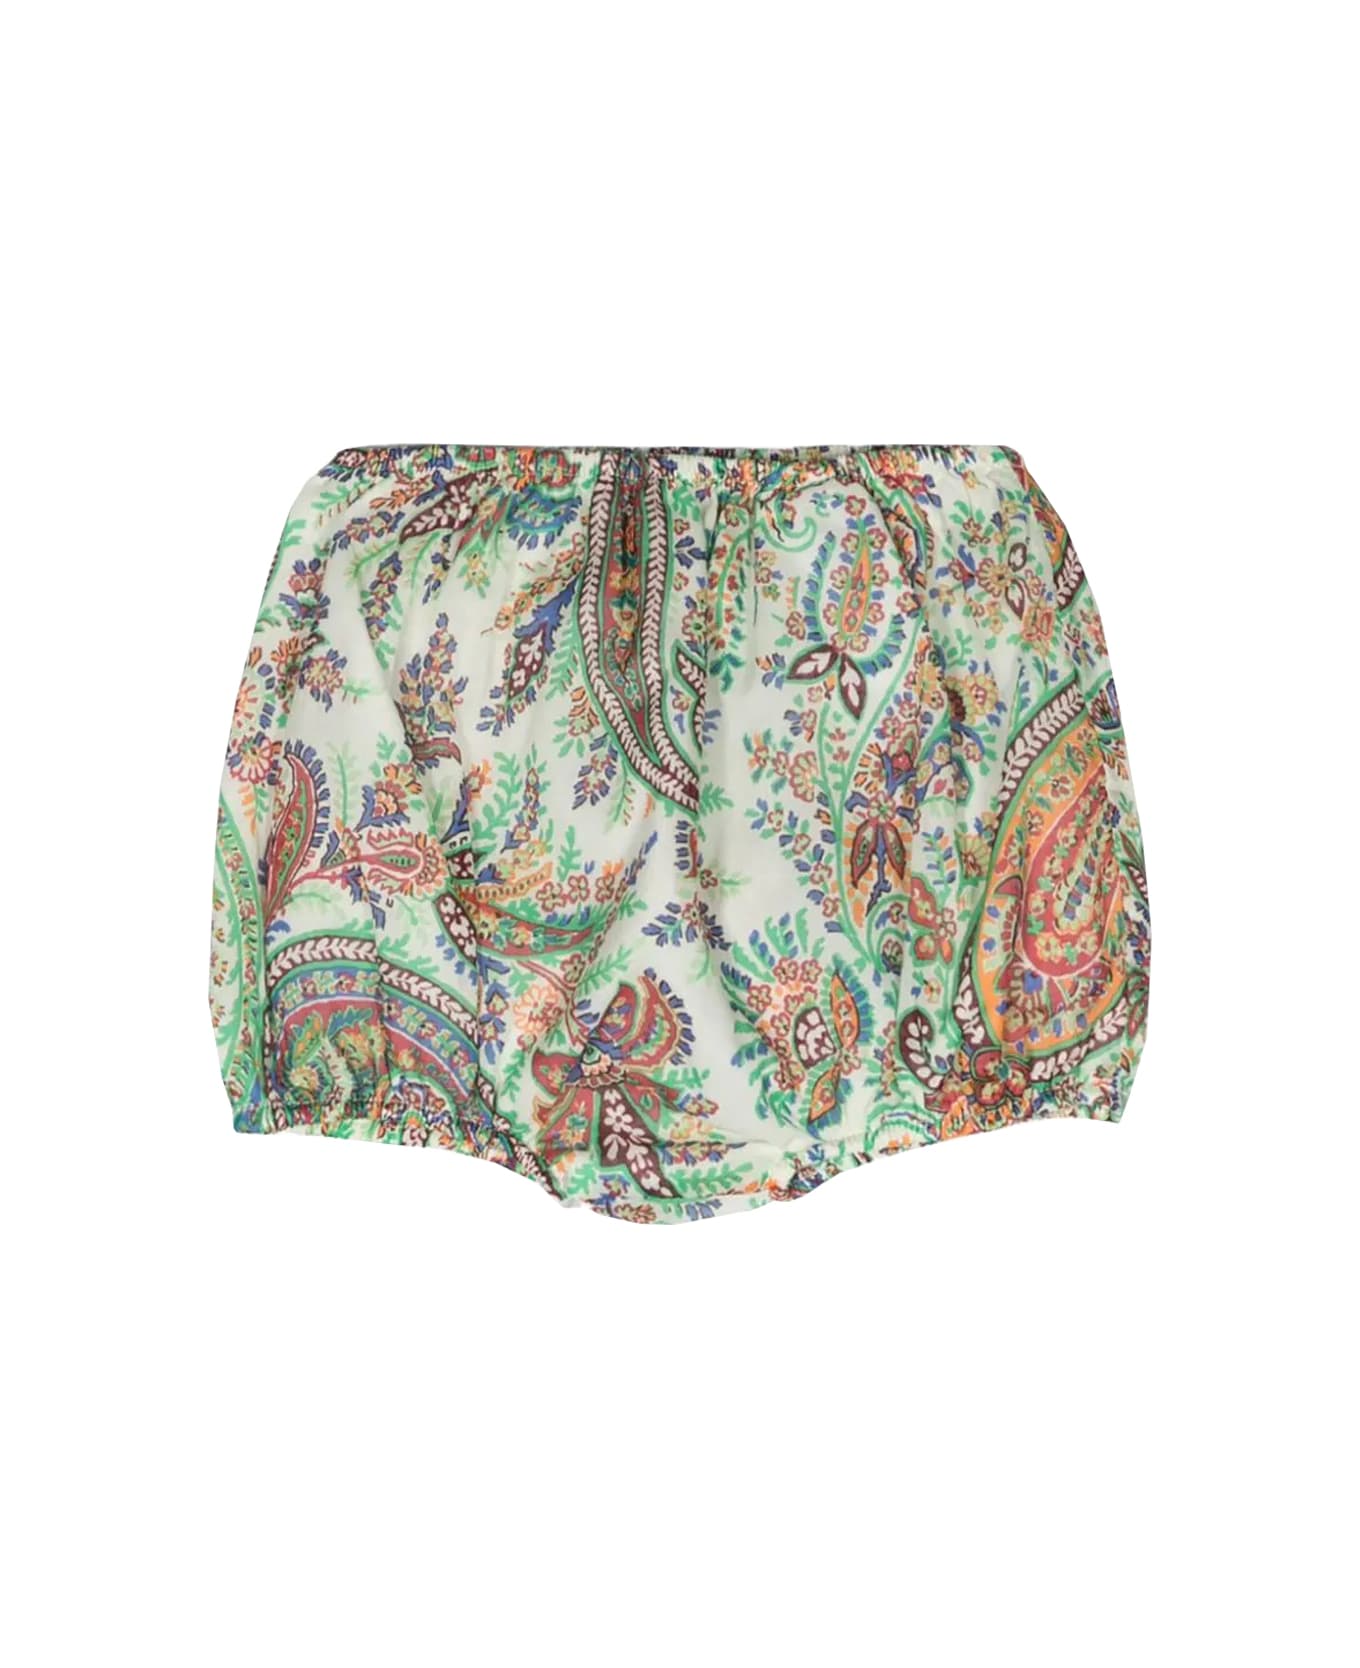 Etro Floral Paisley Shorts - Multicolor ボトムス